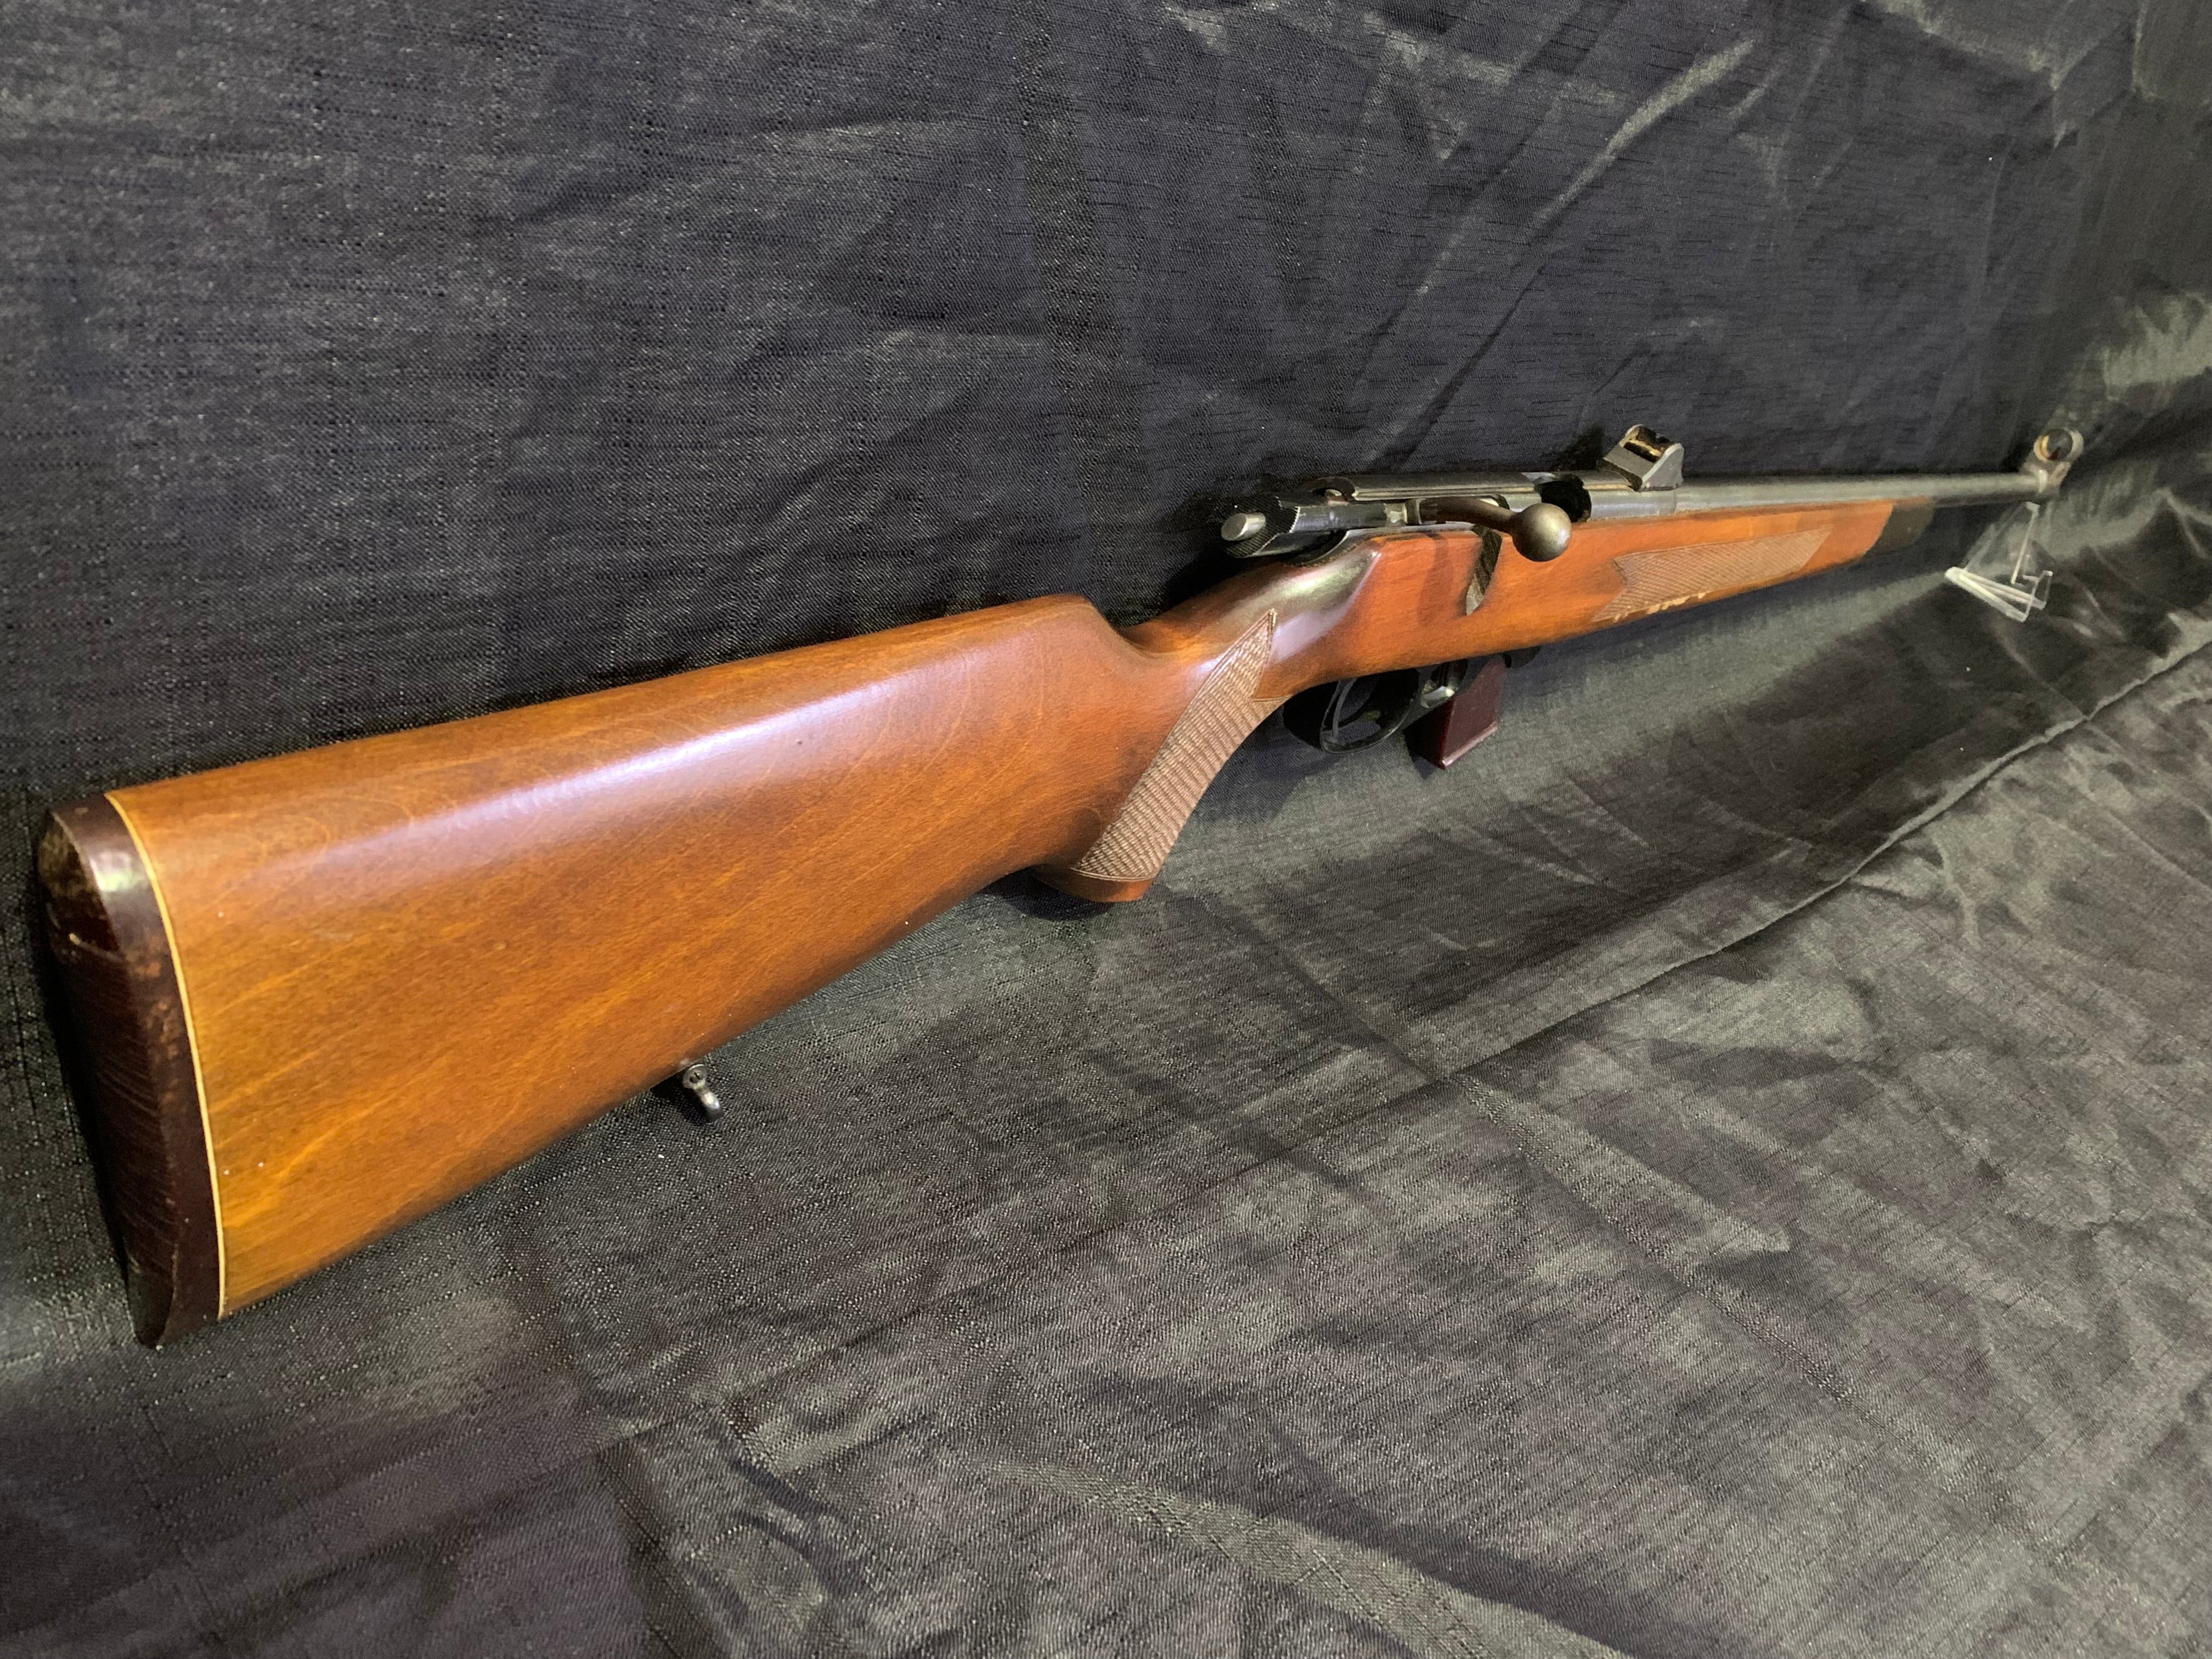 PREOWNED Toz T03 .22LR Rim Fire Bolt Repeater Rifle - Preowned, Rifle, Rimfire, Rimfire Rifle, Toz - Granbergs Firearms